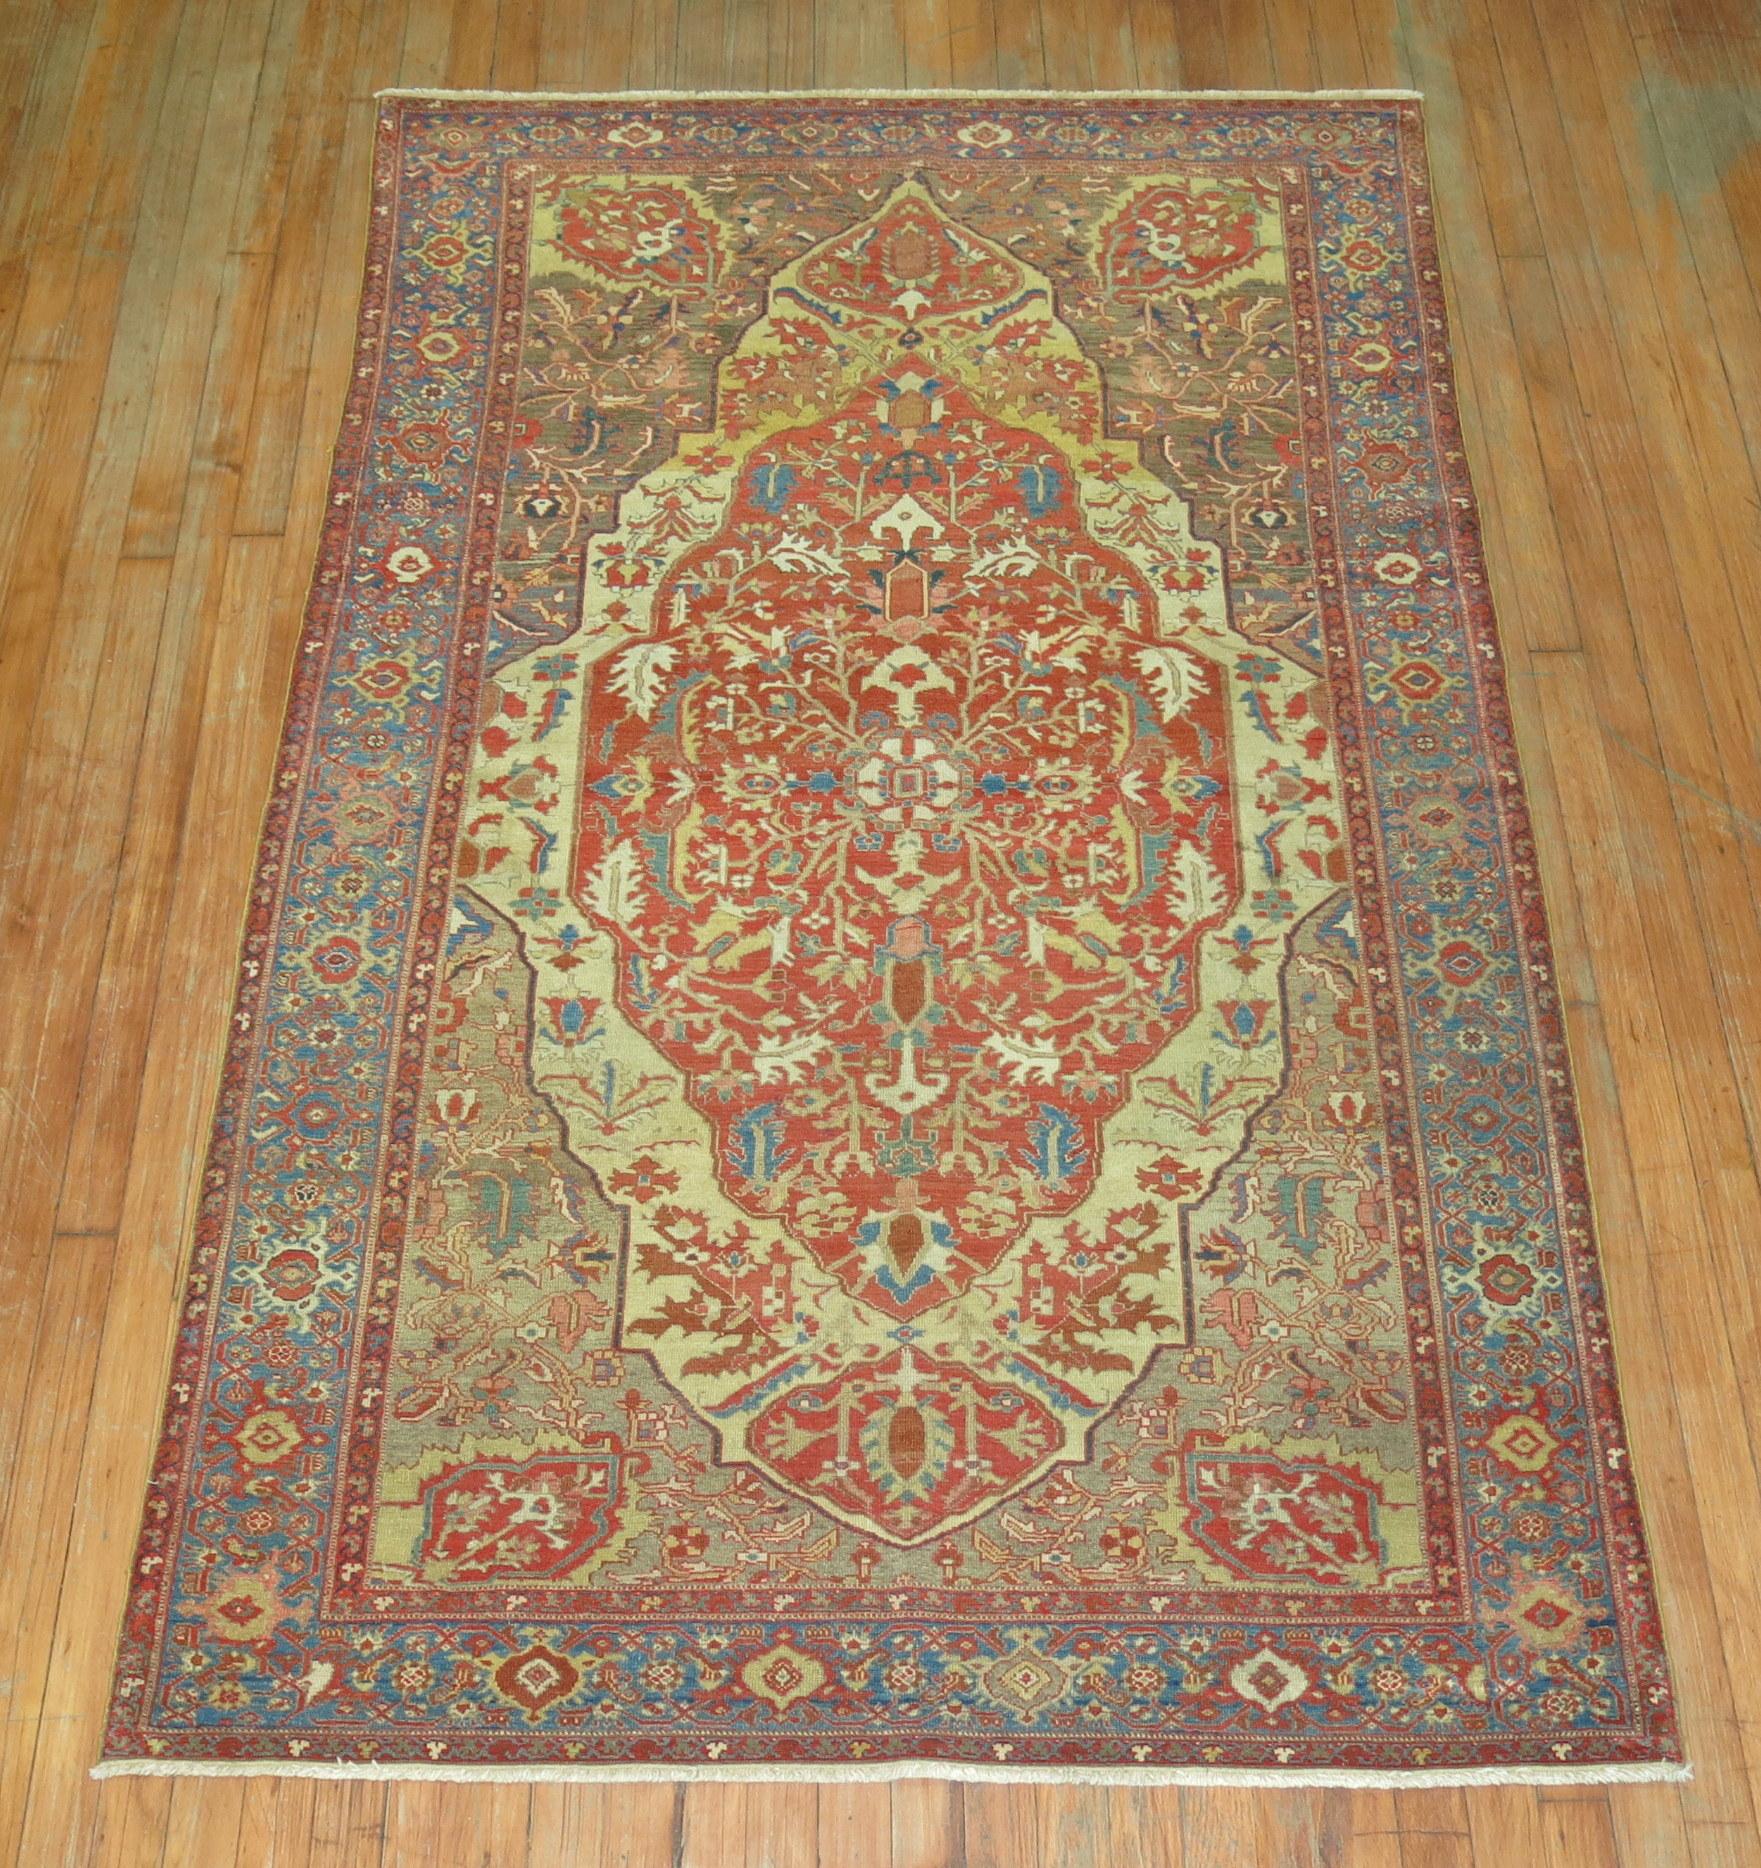 A finely woven authentic handmade 19th century Persian Malayer rug.

Measures: 4'3